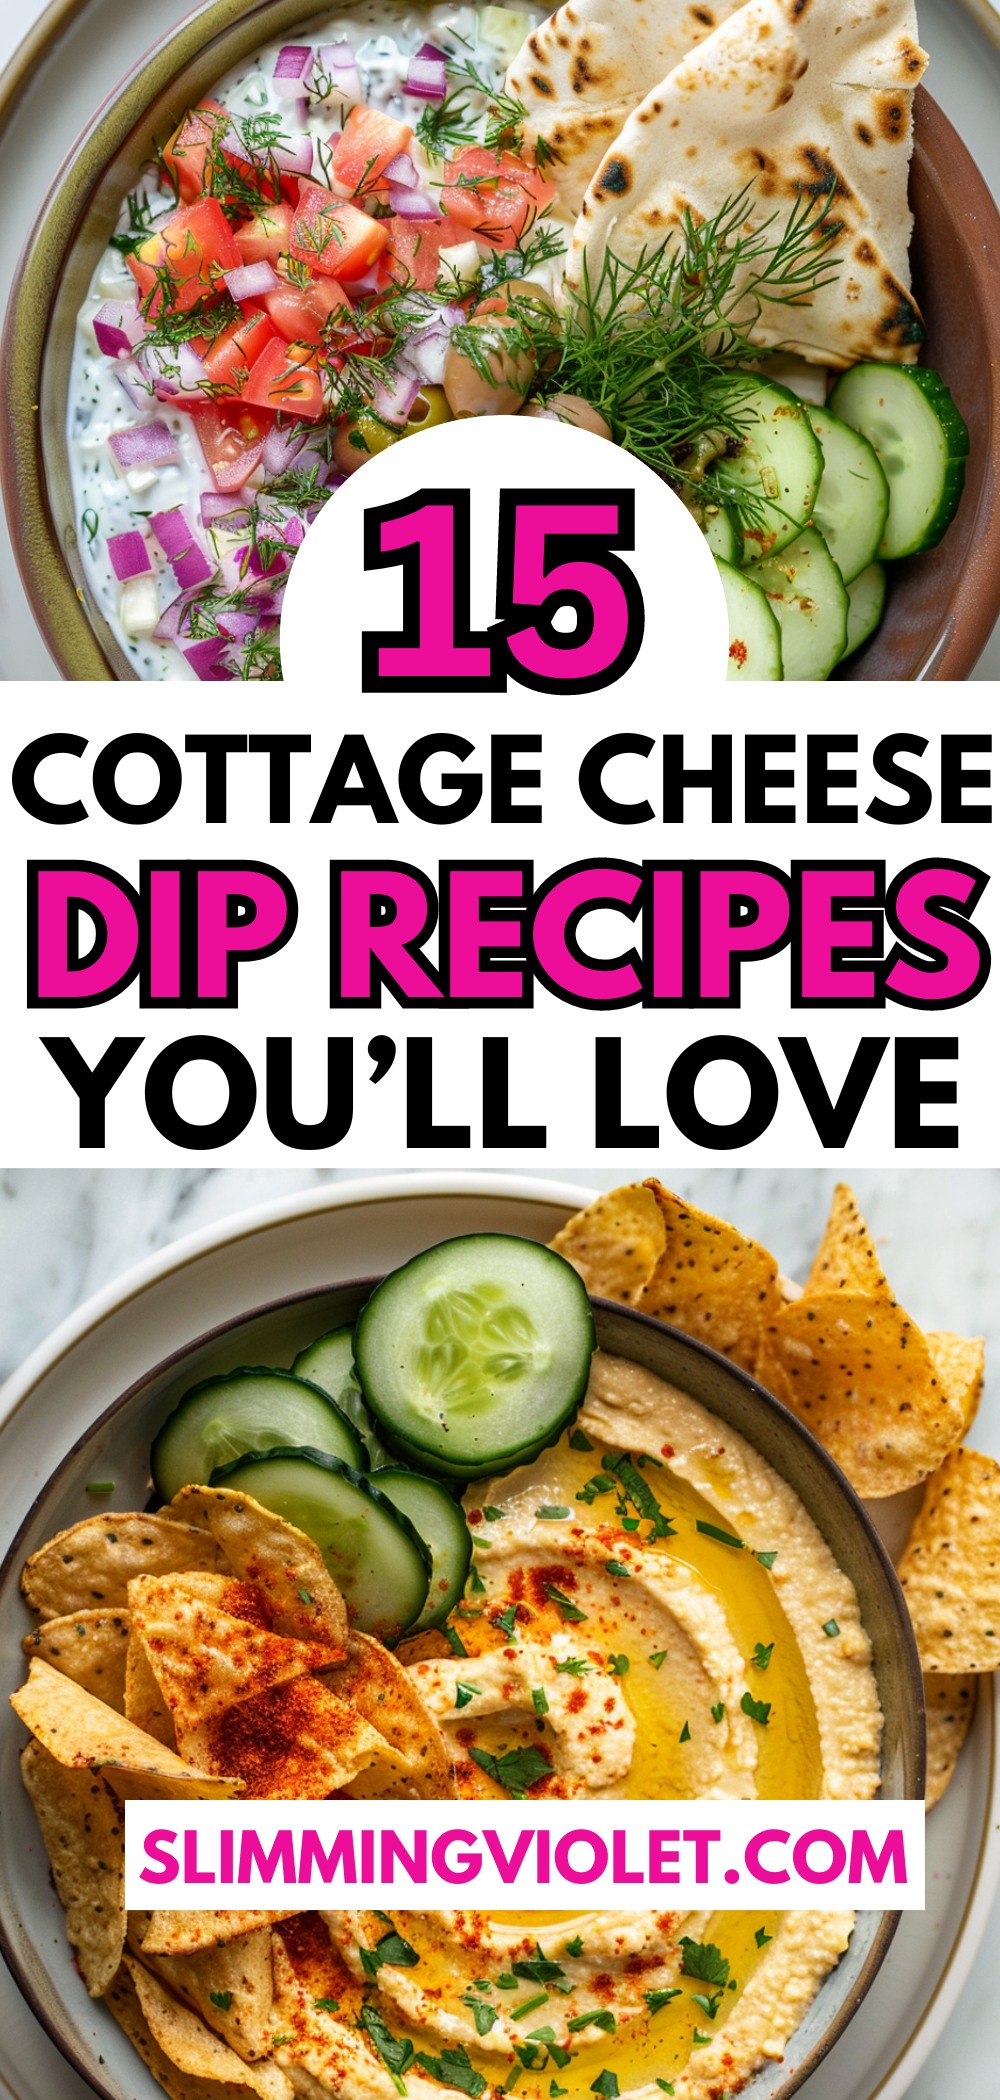 15 cottage cheese dip recipes